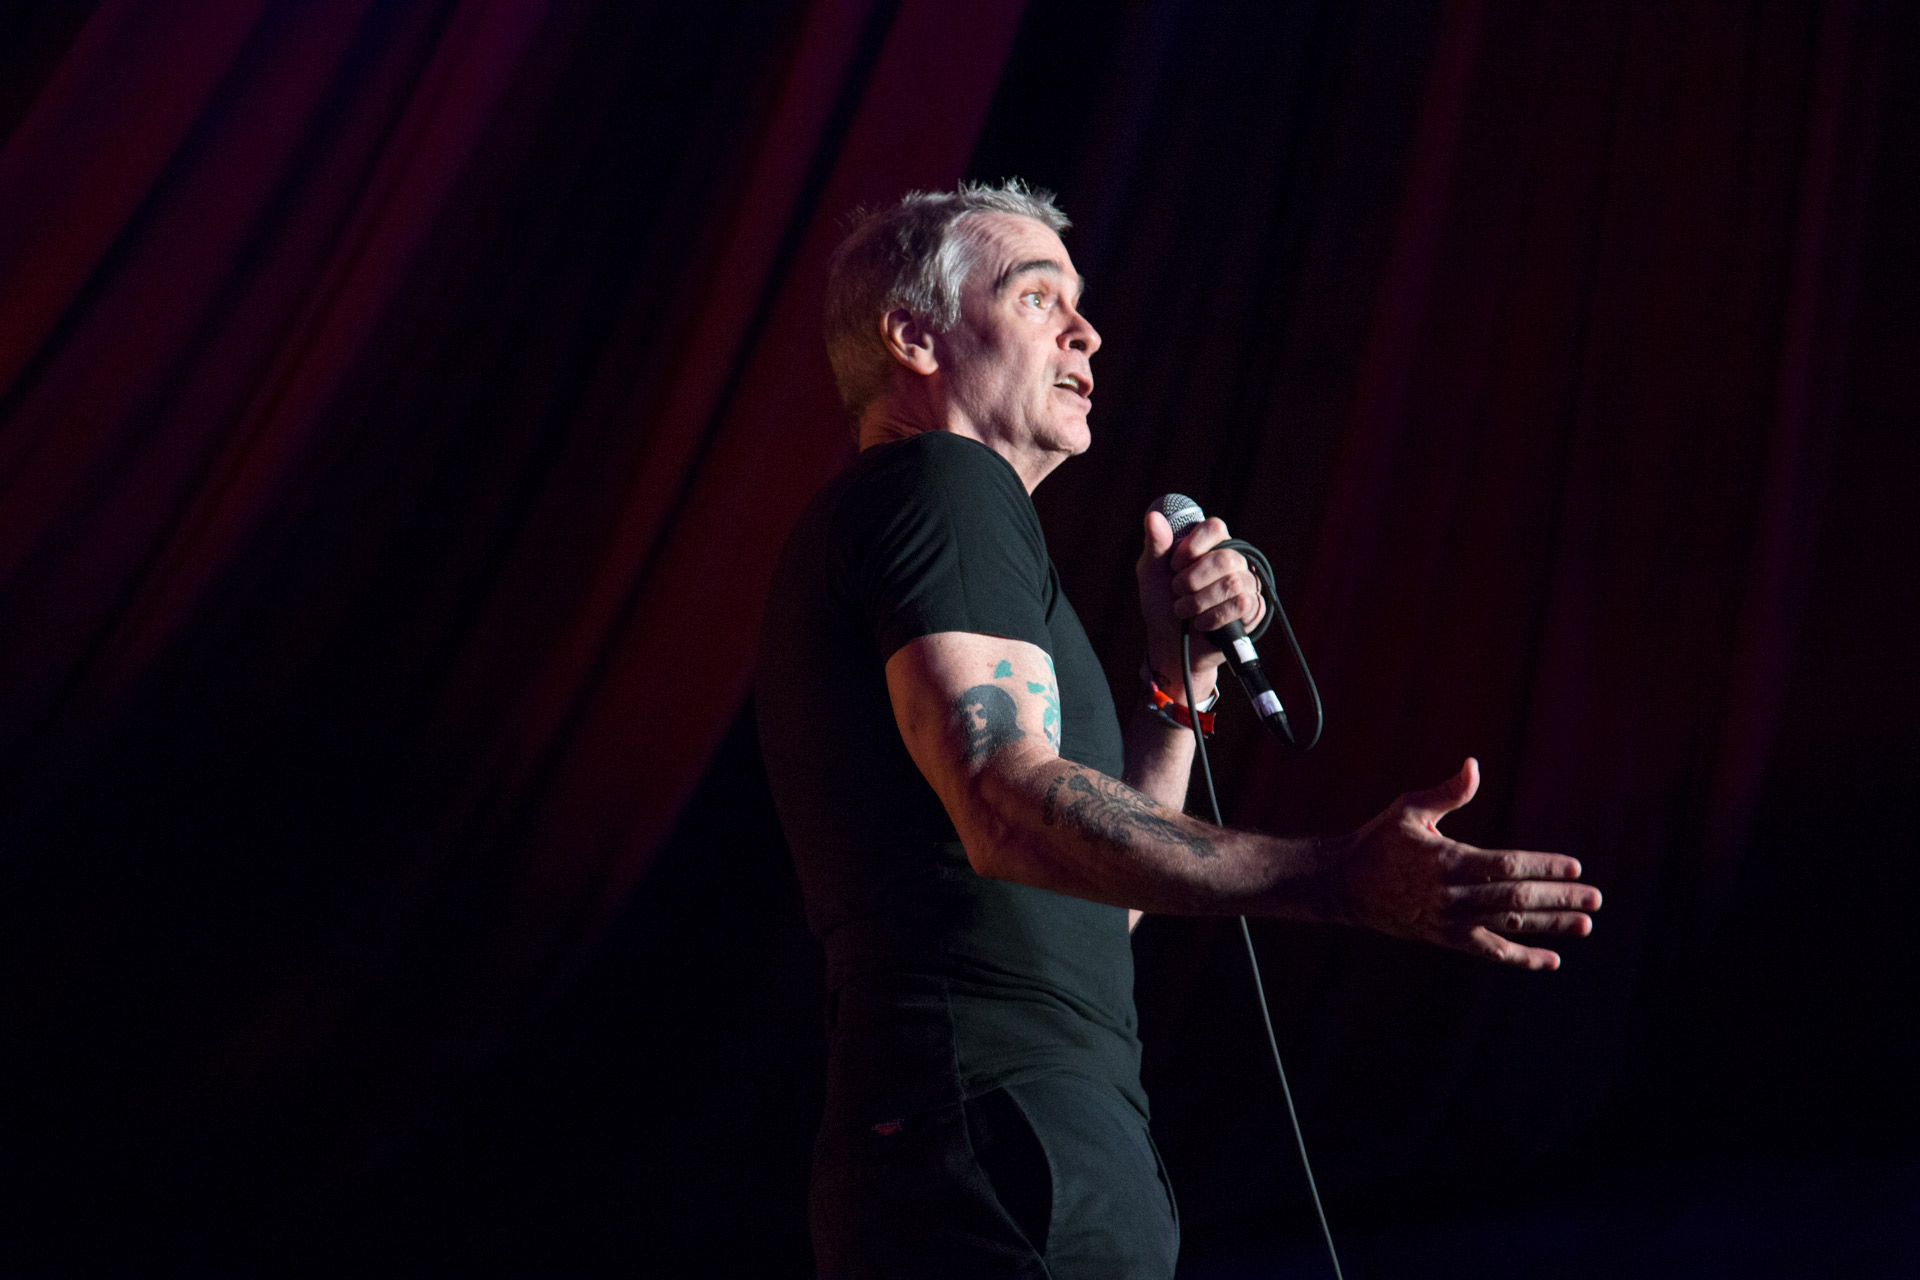 Henry Rollins performs at the Outside Lands music festival in San Francisco, Aug. 11, 2017.